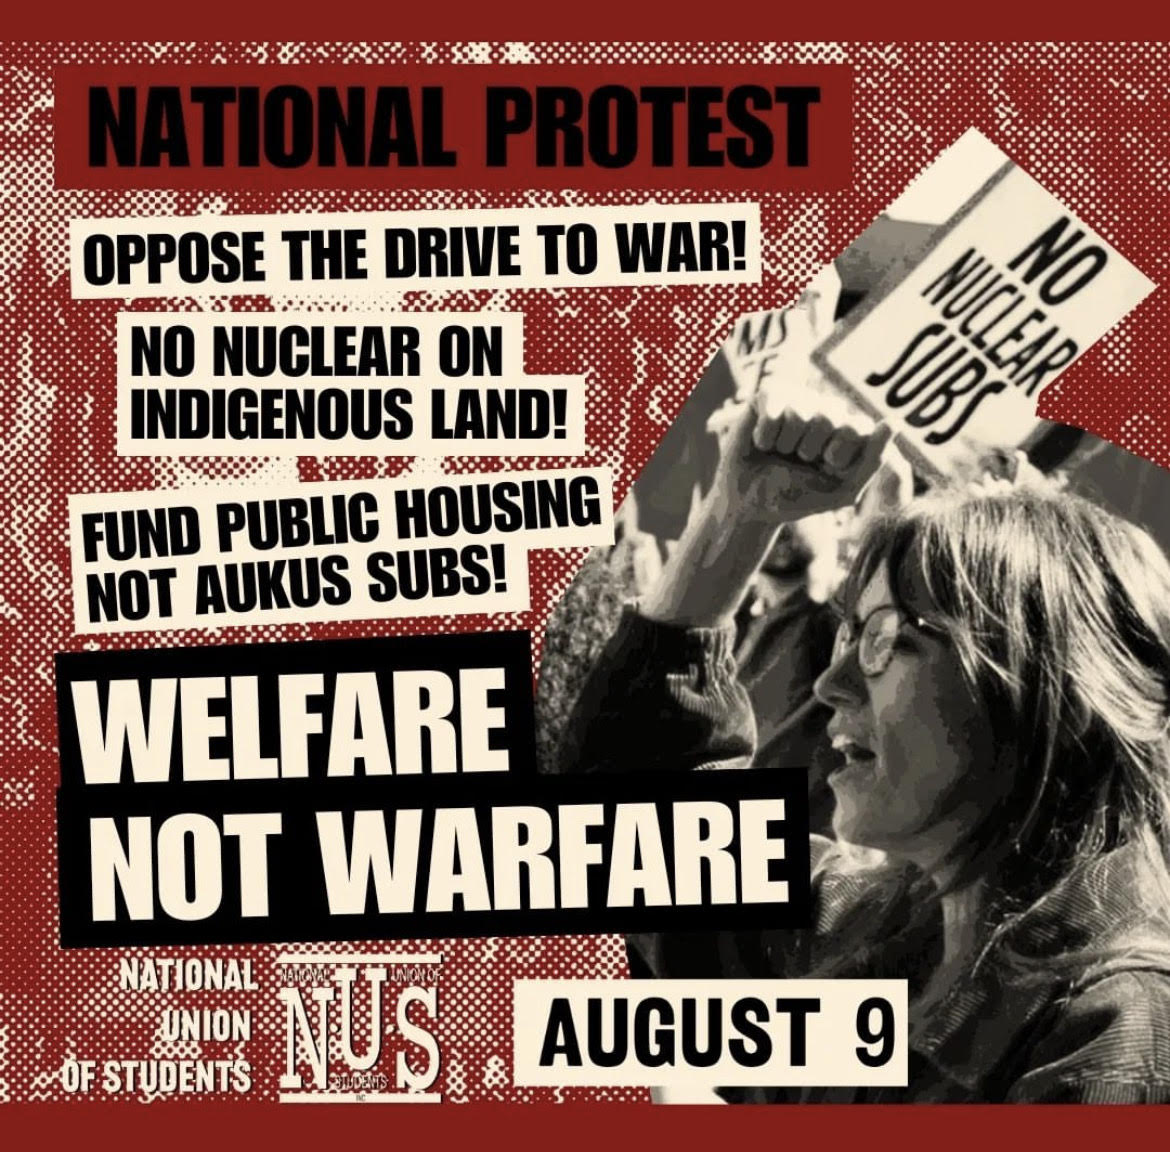 Poster for Welfare not Warfare national day of action on August 9